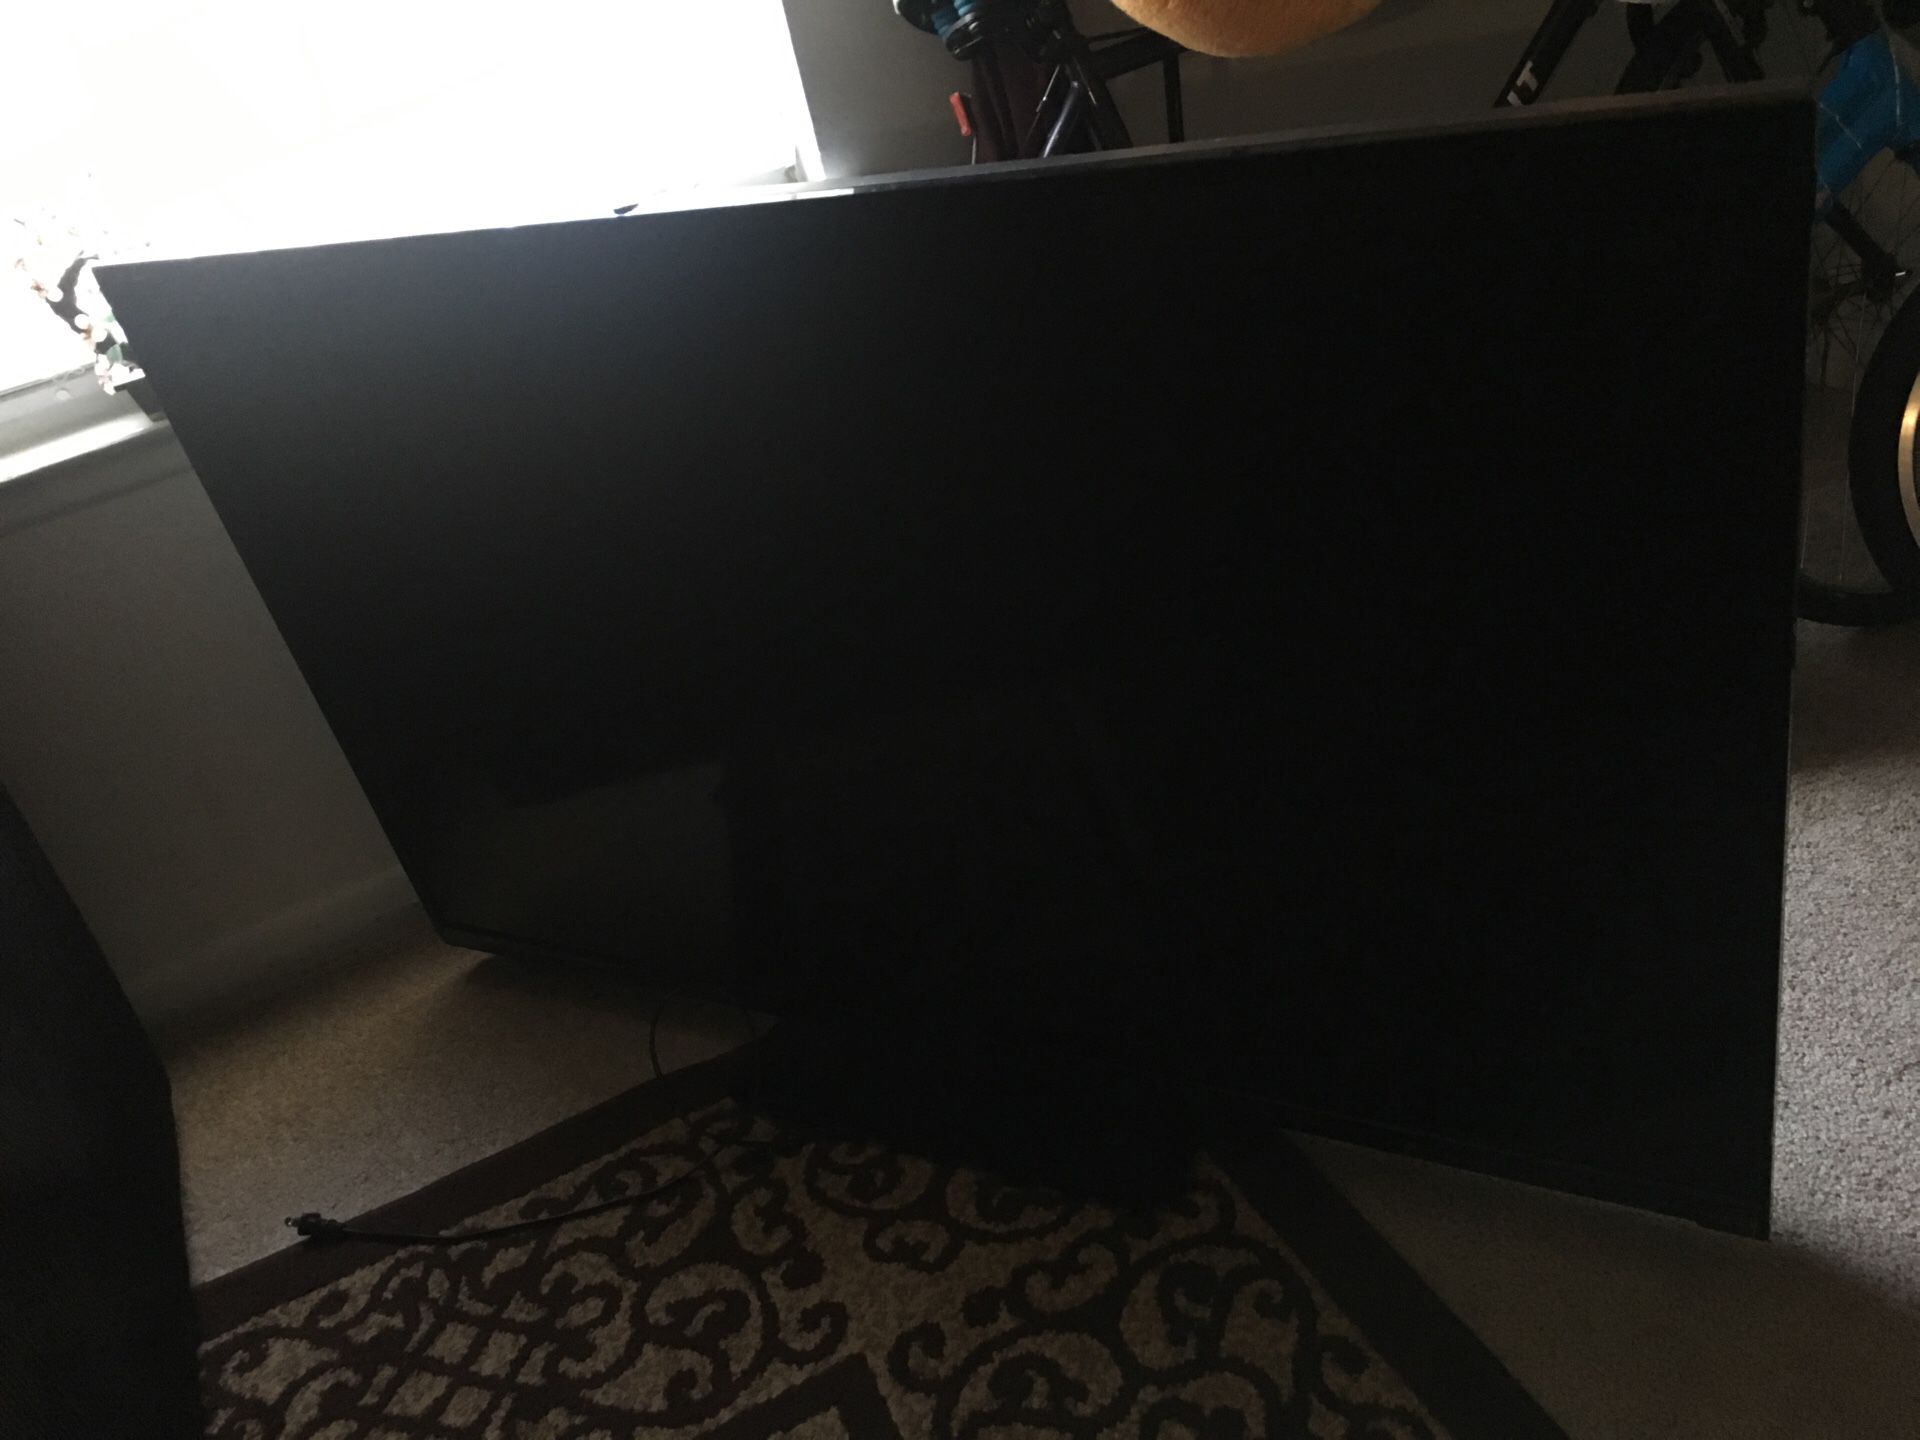 Free tv screen is cracked